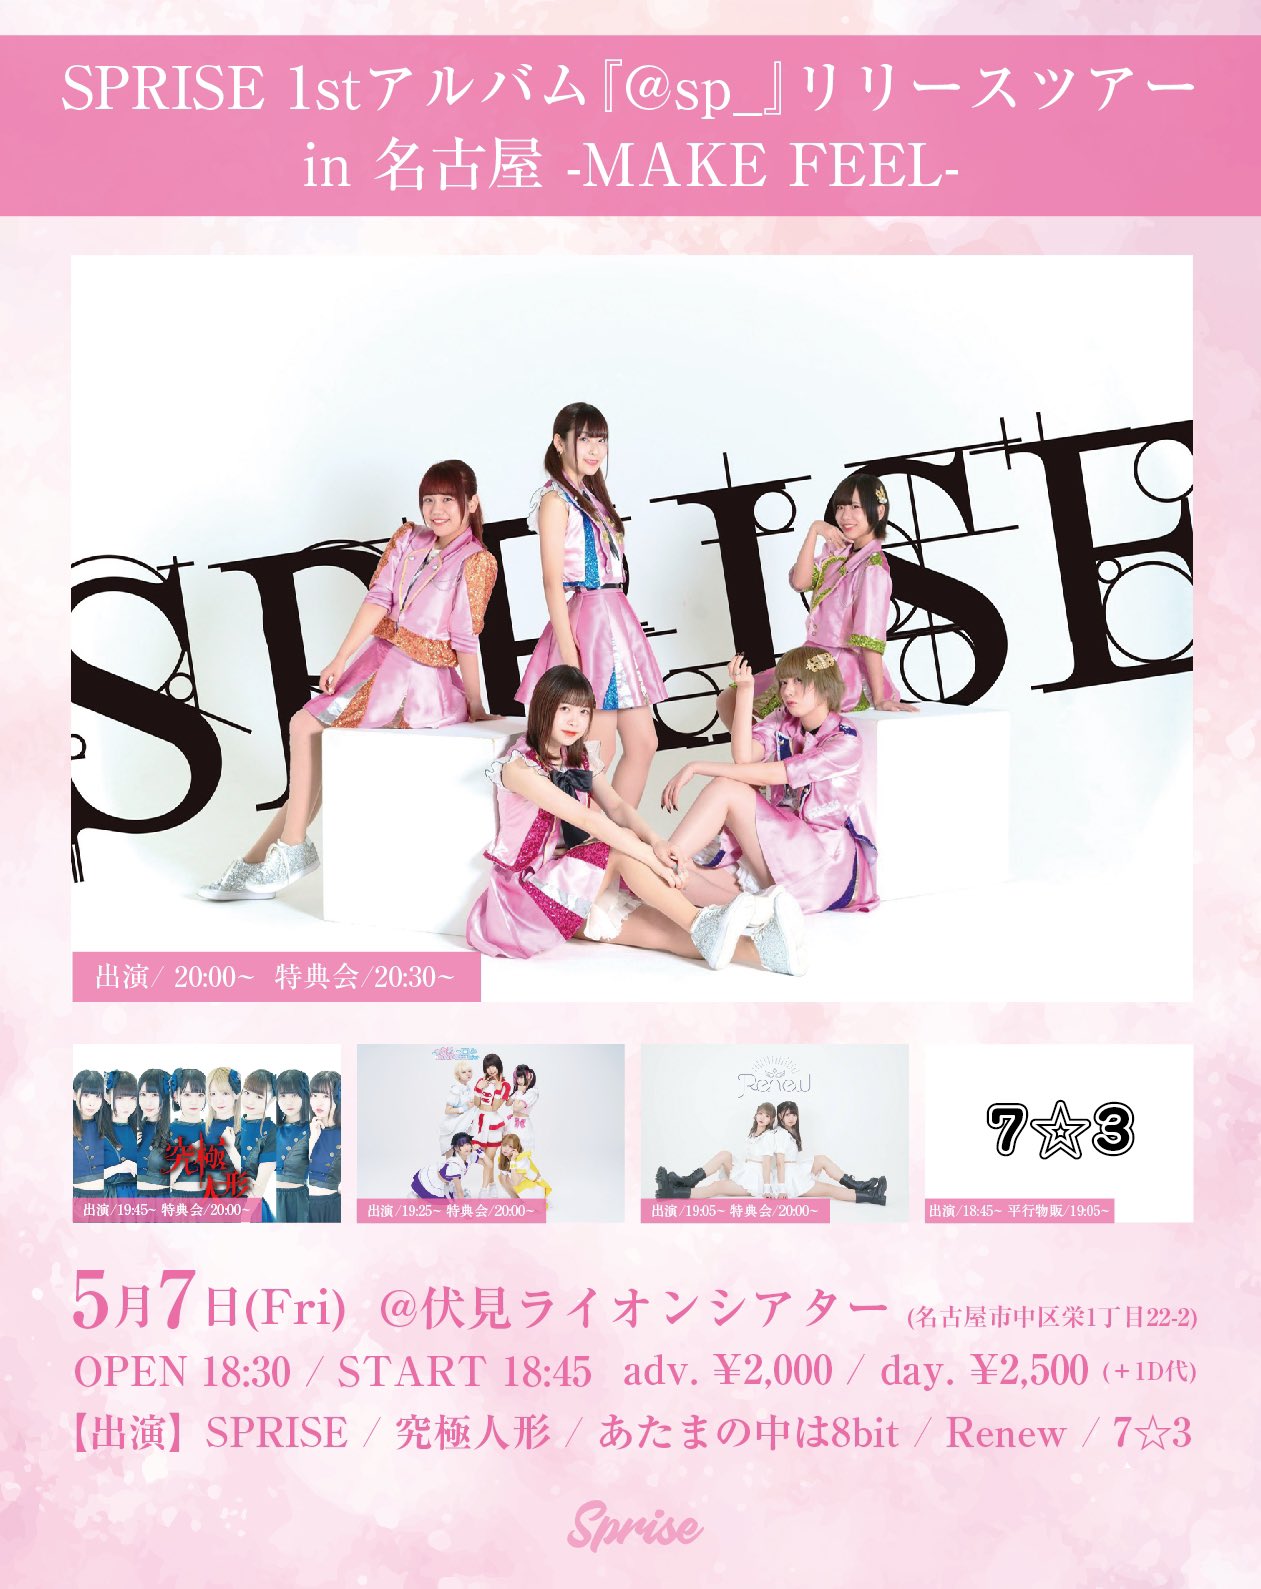 SPRISE @sp_ リリースツアー 名古屋